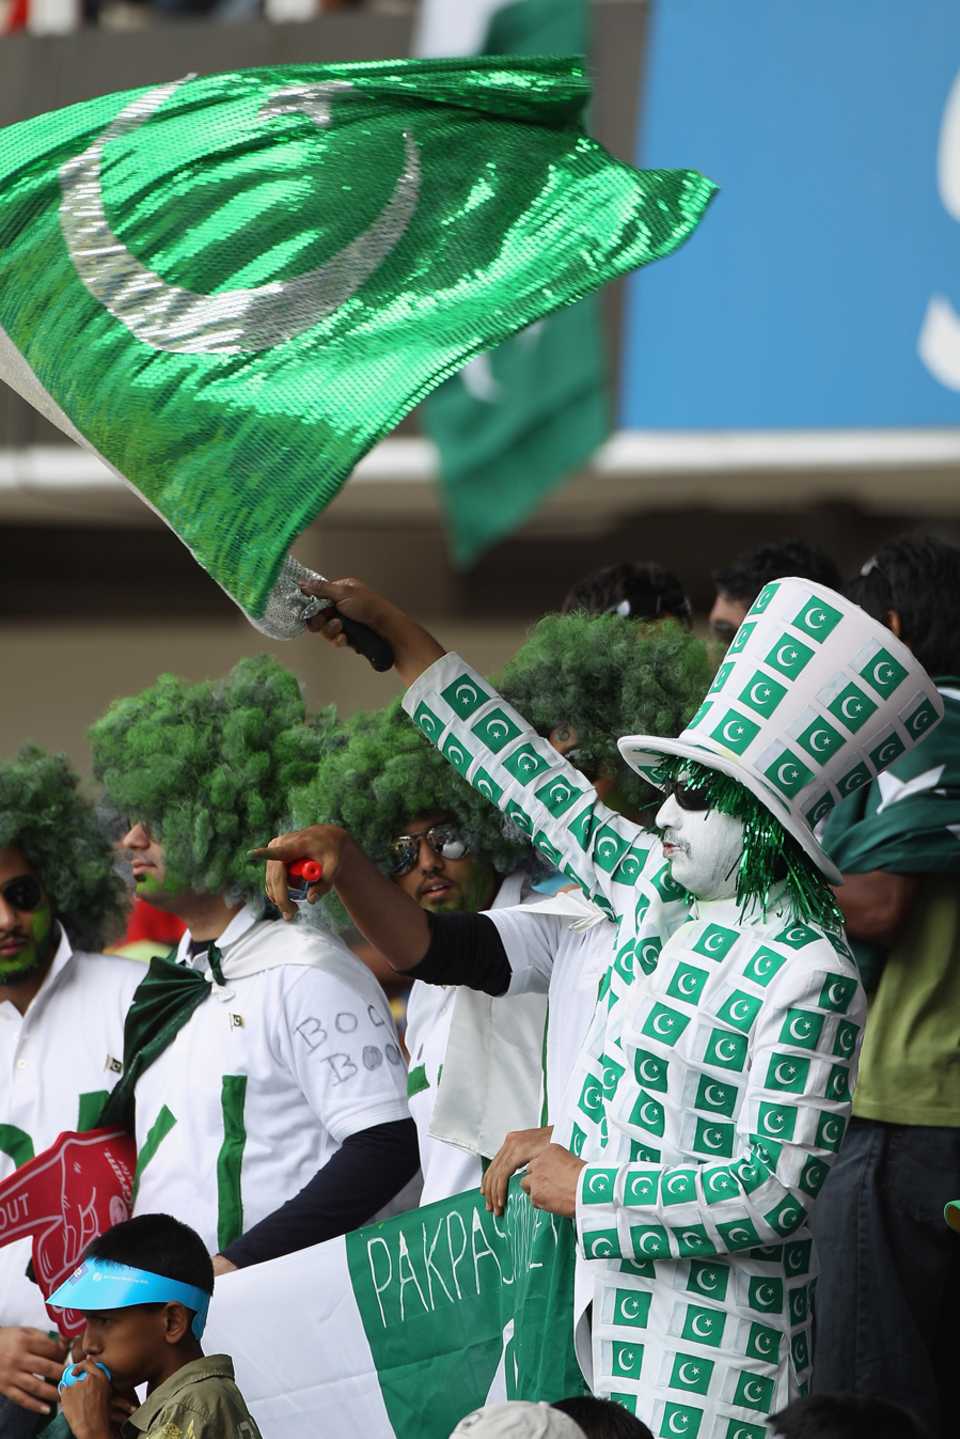 A Pakistan fan brightens things up in the stands, Pakistan v Zimbabwe, World Cup, Pallekele, March 14, 2011